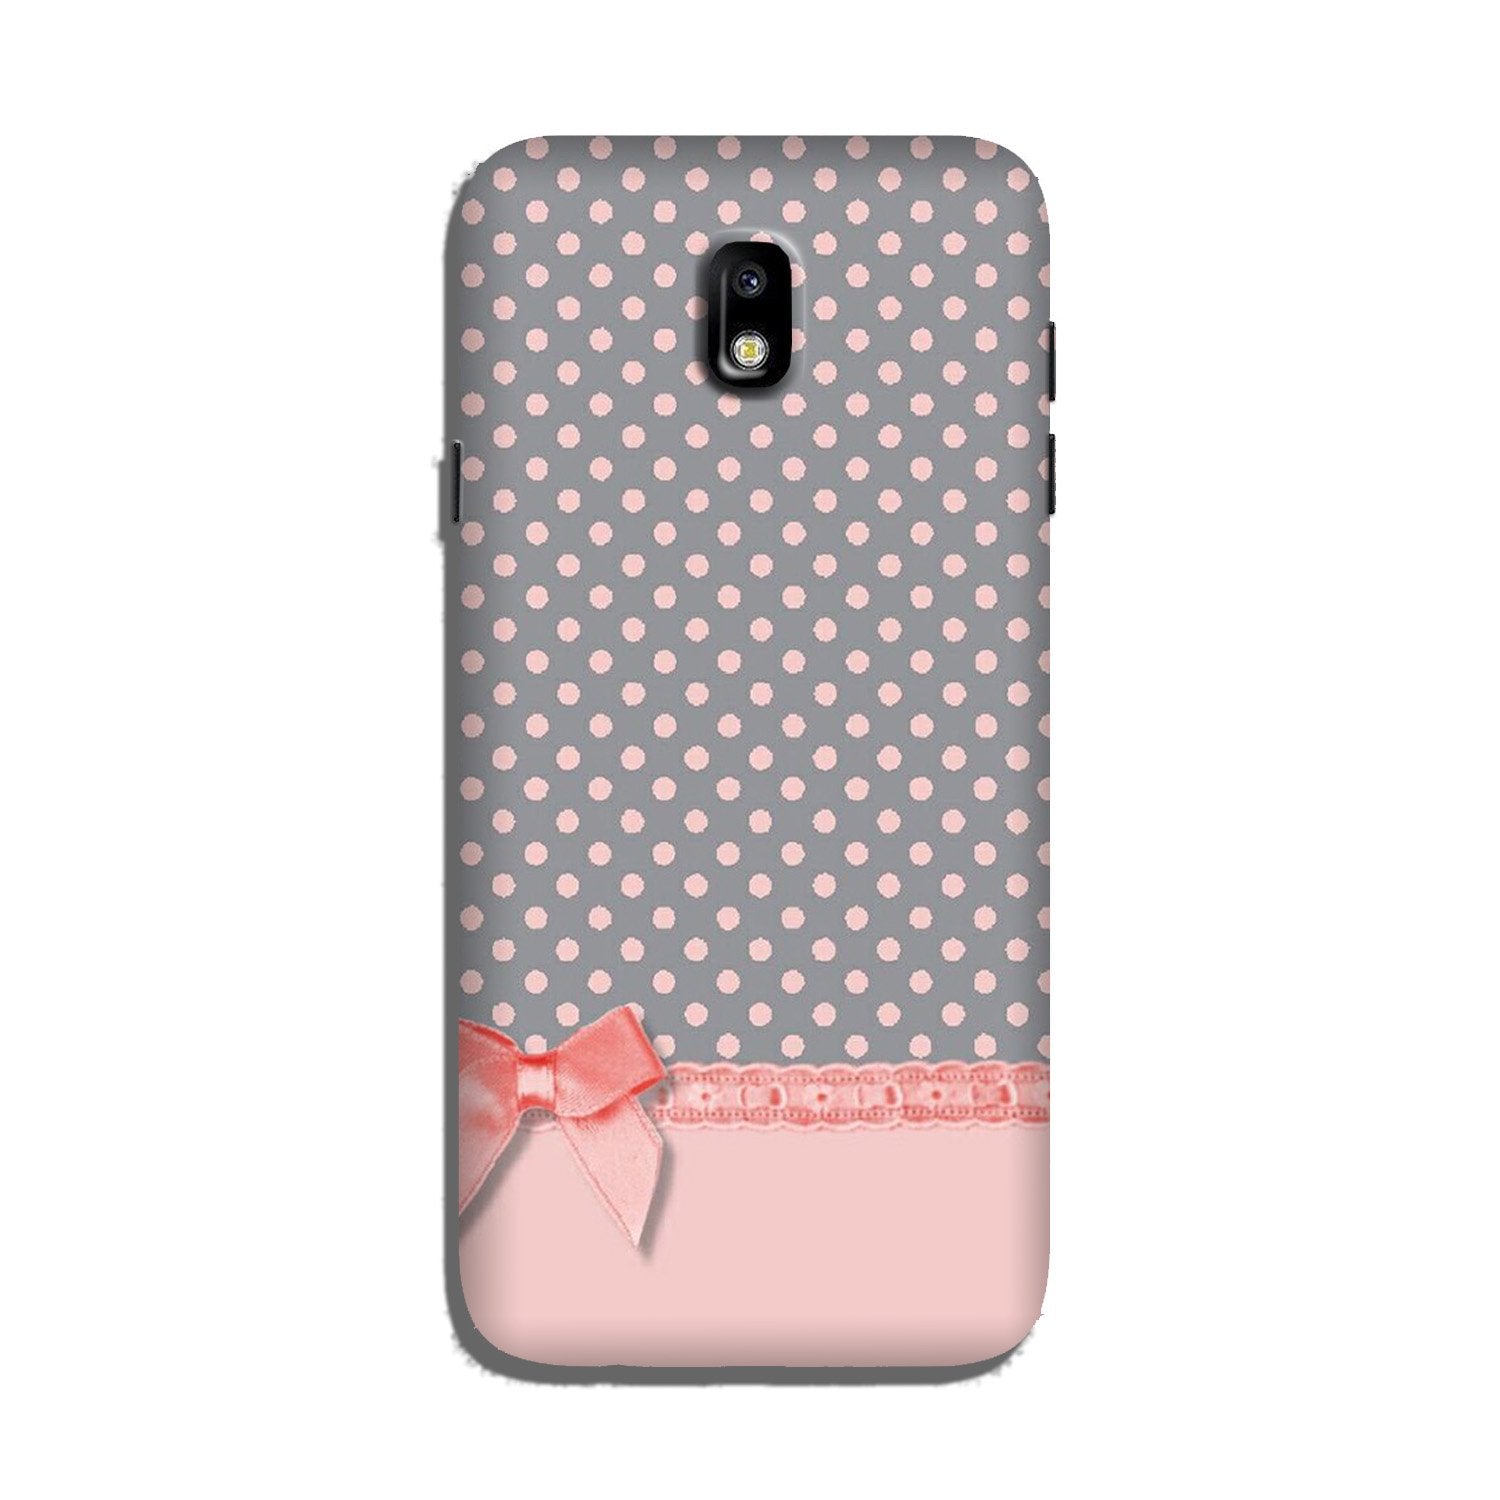 Gift Wrap2 Case for Galaxy J3 Pro